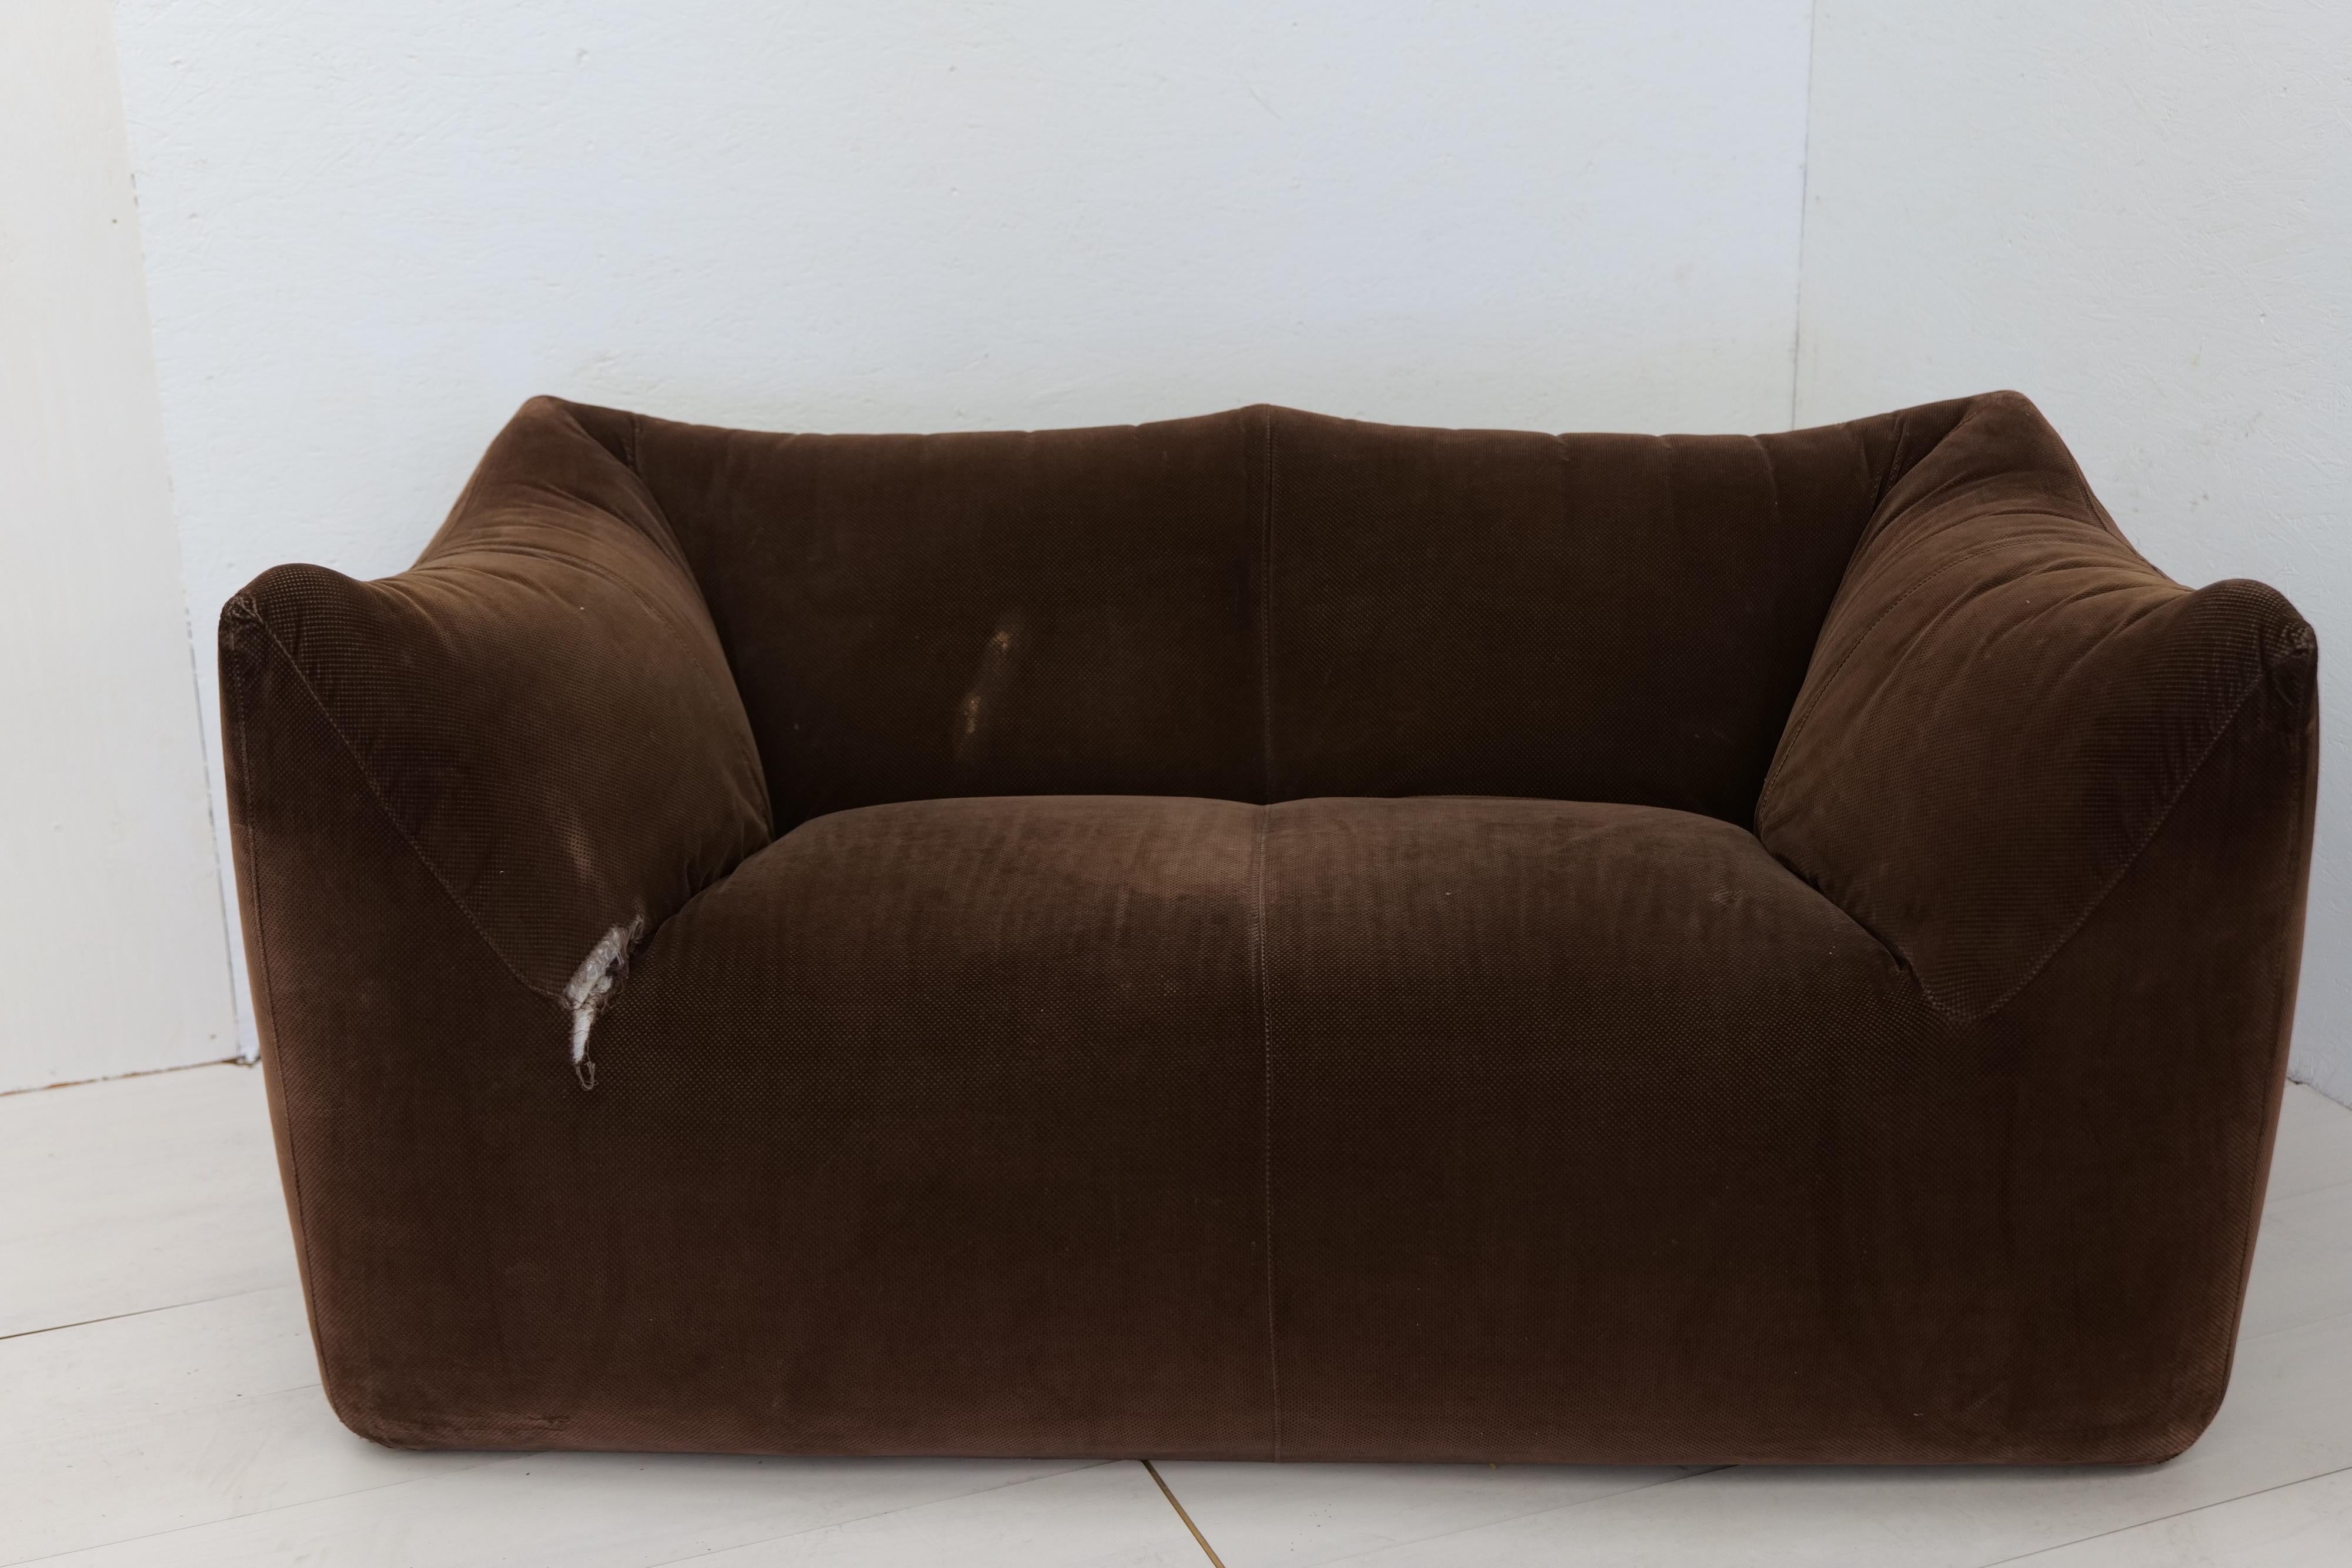 This comfortable brown original fabric settee is bulky and playful, shaped as if it is merely a large cushion and the accompanying feeling is the same. It is designed by Mario Bellini and was the culmination of research into stuffed furniture. In